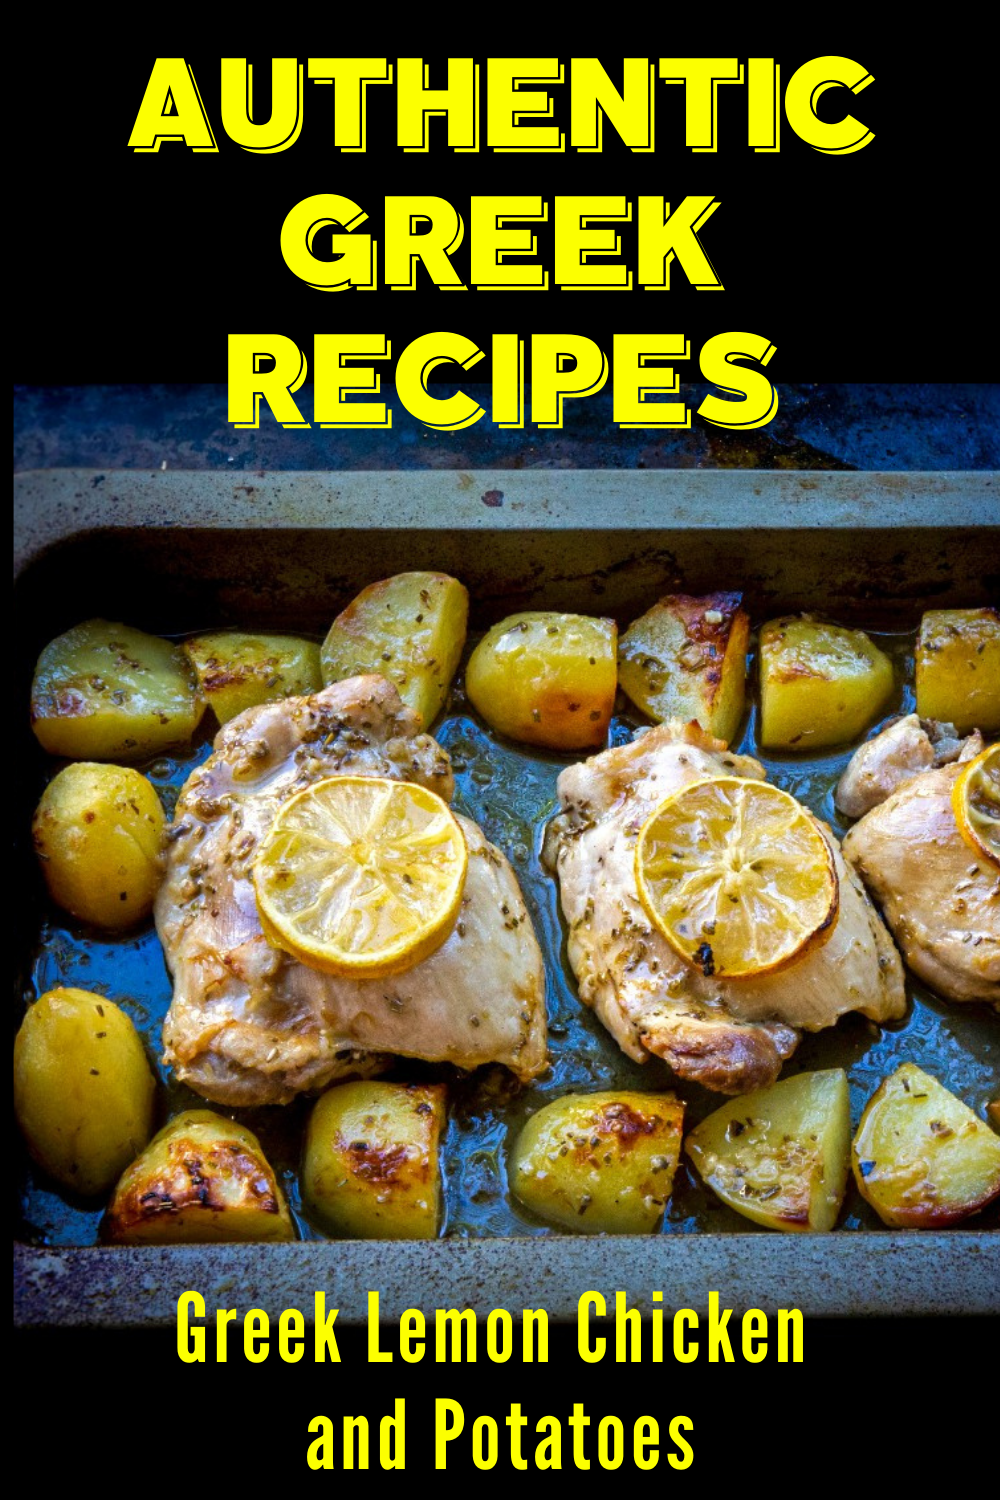 Authentic Greek Recipes - Lemon Chicken and Potatoes